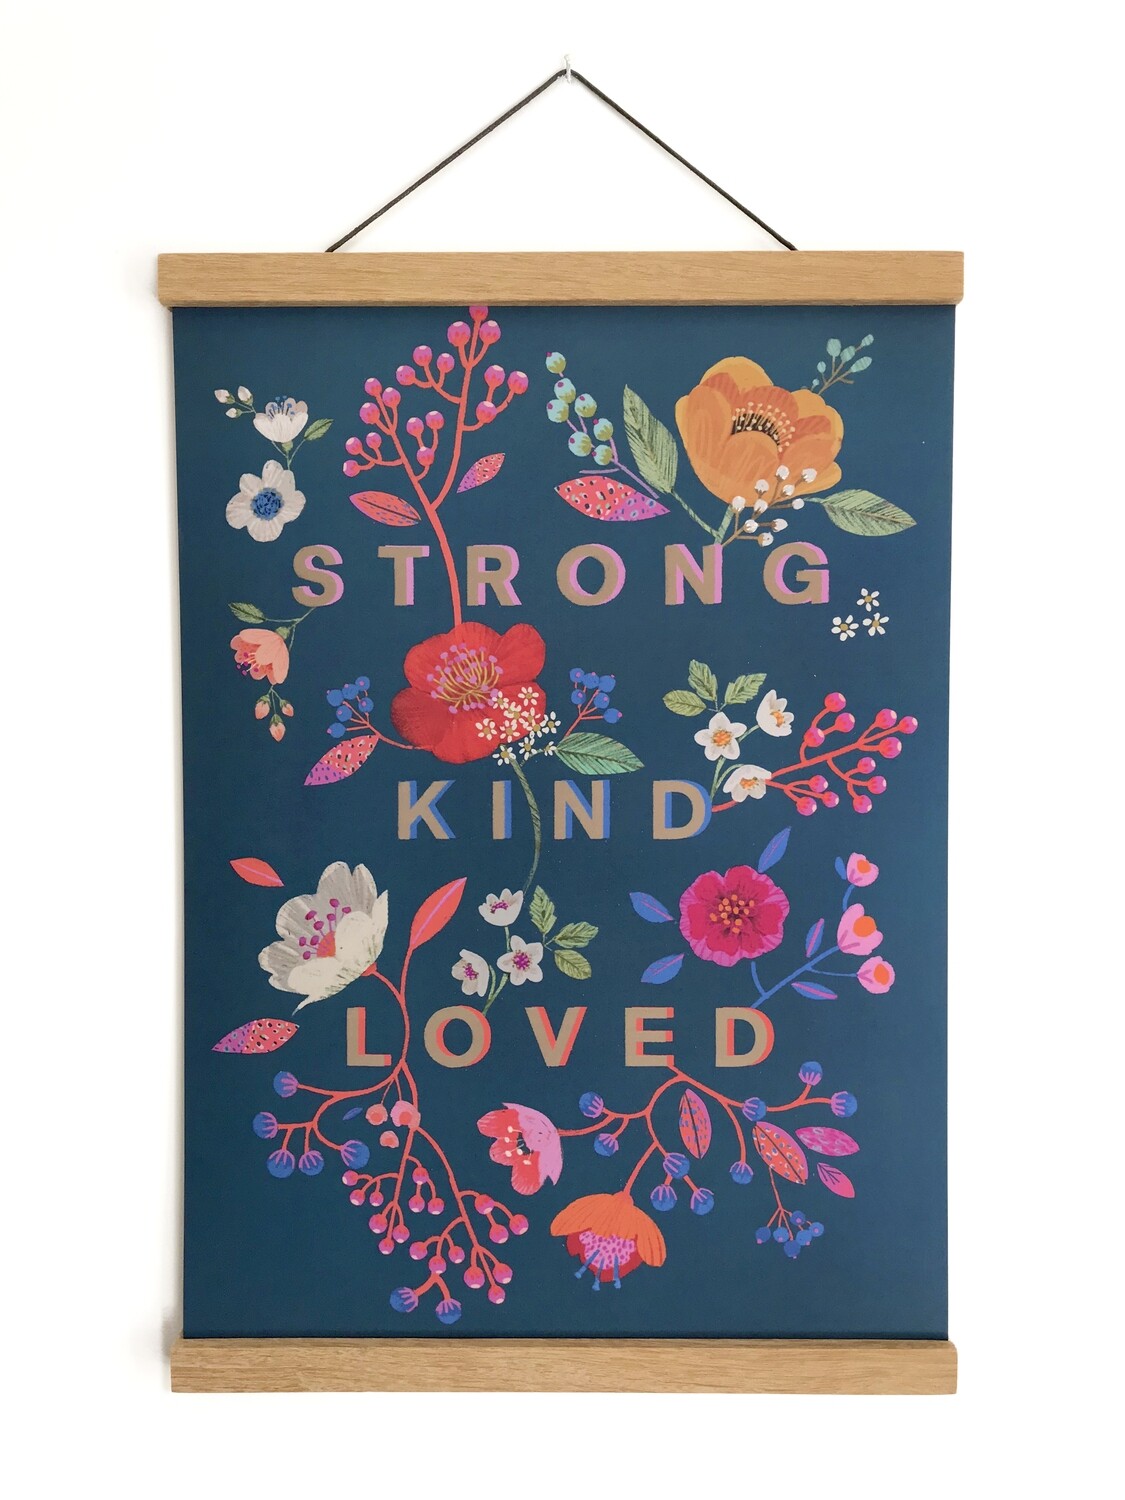 Strong Kind Loved A3 print